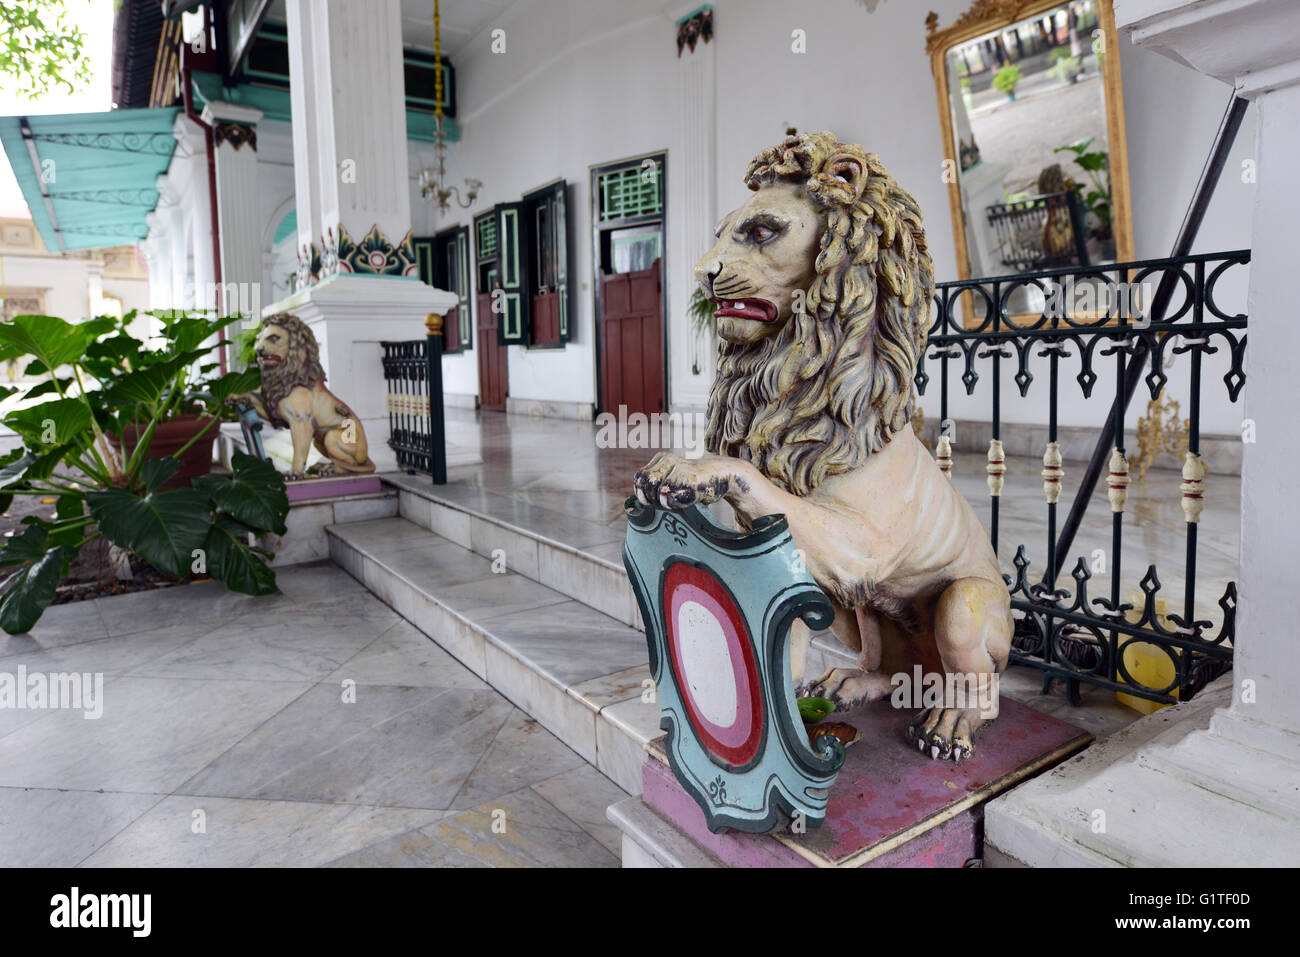 Lions sculptures protecting the Sultan's palace in Yogyakarta. Stock Photo